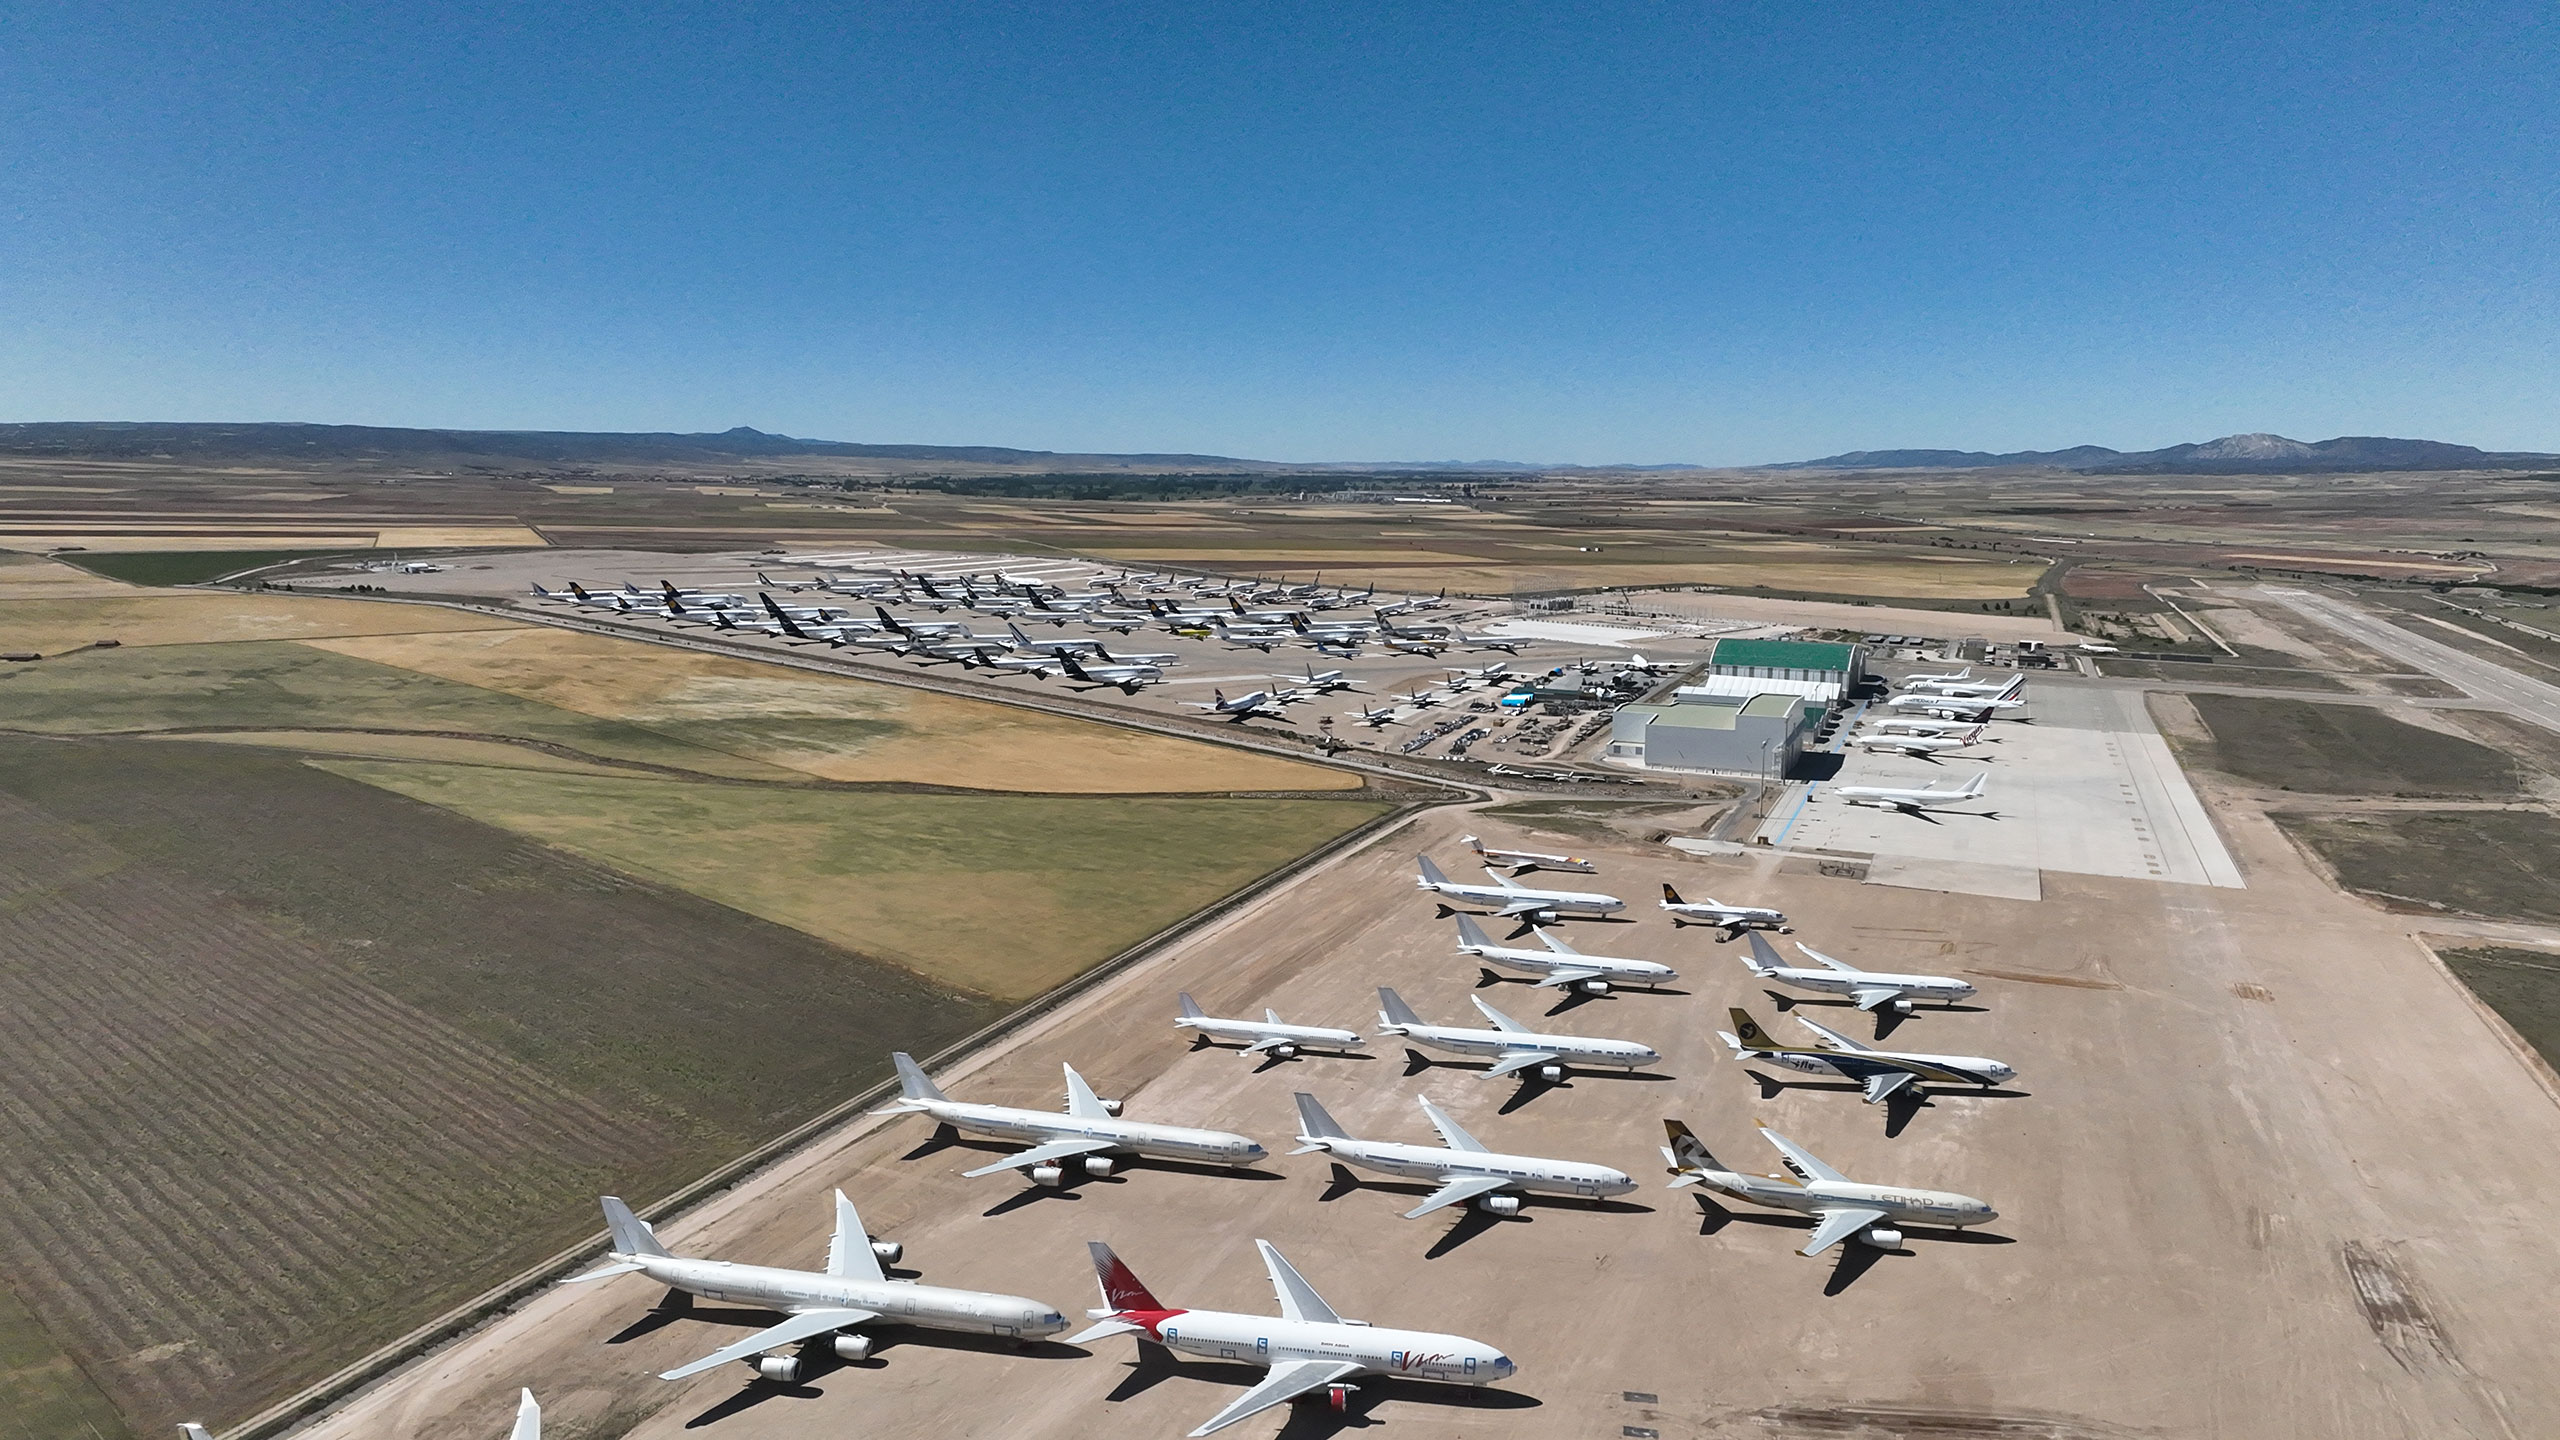 Teruel Airport's new hangar that can house two Airbus A380 aircraft.